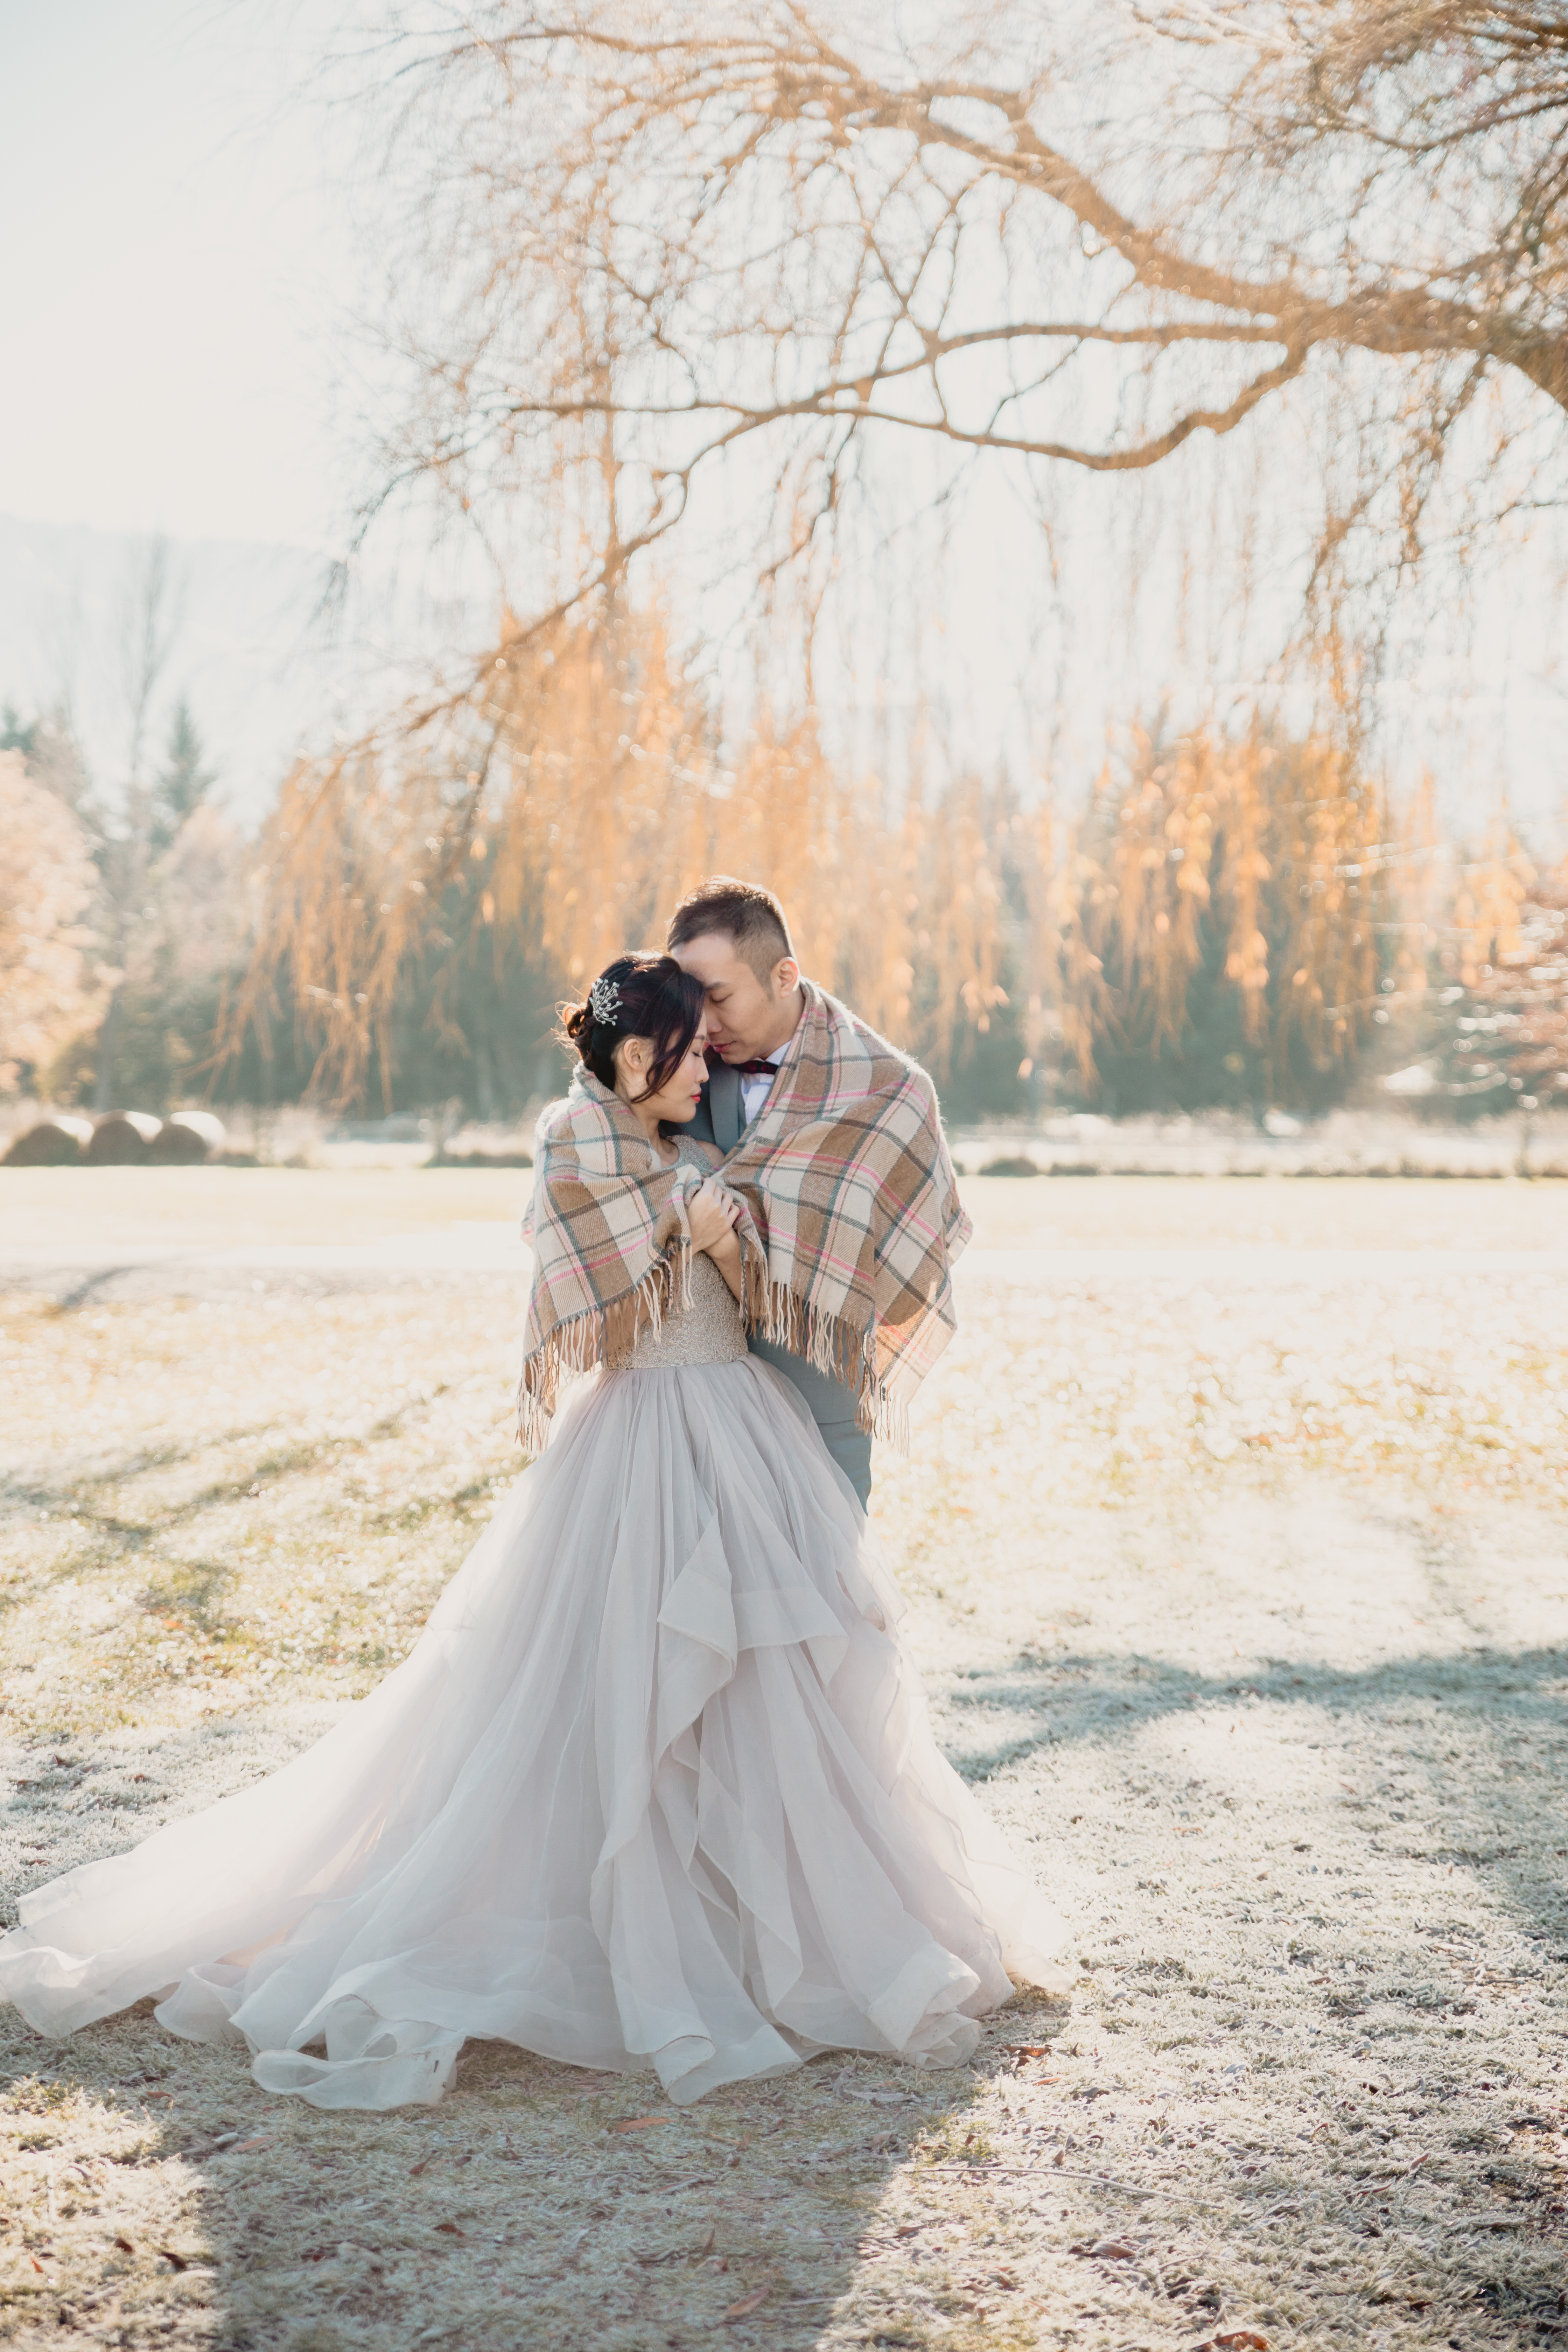 How To Stay Warm During Winter Wedding Portraits